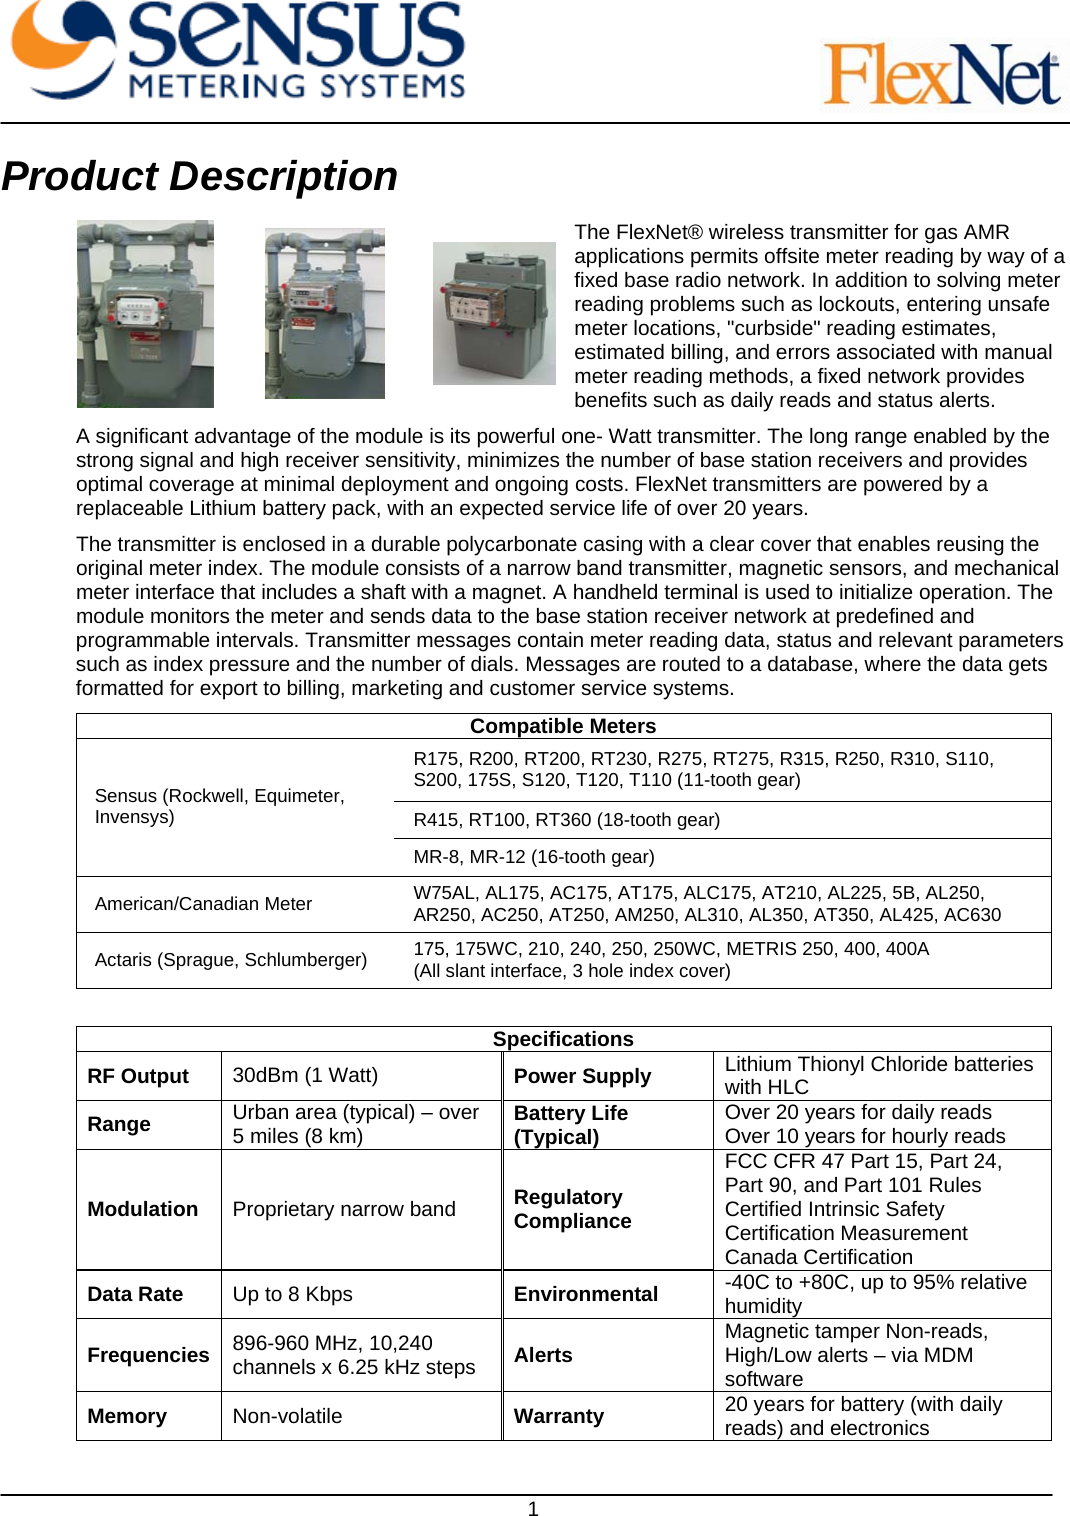     1 Product Description The FlexNet® wireless transmitter for gas AMR applications permits offsite meter reading by way of a fixed base radio network. In addition to solving meter reading problems such as lockouts, entering unsafe meter locations, &quot;curbside&quot; reading estimates, estimated billing, and errors associated with manual meter reading methods, a fixed network provides benefits such as daily reads and status alerts.  A significant advantage of the module is its powerful one- Watt transmitter. The long range enabled by the strong signal and high receiver sensitivity, minimizes the number of base station receivers and provides optimal coverage at minimal deployment and ongoing costs. FlexNet transmitters are powered by a replaceable Lithium battery pack, with an expected service life of over 20 years.  The transmitter is enclosed in a durable polycarbonate casing with a clear cover that enables reusing the original meter index. The module consists of a narrow band transmitter, magnetic sensors, and mechanical meter interface that includes a shaft with a magnet. A handheld terminal is used to initialize operation. The module monitors the meter and sends data to the base station receiver network at predefined and programmable intervals. Transmitter messages contain meter reading data, status and relevant parameters such as index pressure and the number of dials. Messages are routed to a database, where the data gets formatted for export to billing, marketing and customer service systems. Compatible Meters R175, R200, RT200, RT230, R275, RT275, R315, R250, R310, S110, S200, 175S, S120, T120, T110 (11-tooth gear) R415, RT100, RT360 (18-tooth gear) Sensus (Rockwell, Equimeter, Invensys) MR-8, MR-12 (16-tooth gear) American/Canadian Meter  W75AL, AL175, AC175, AT175, ALC175, AT210, AL225, 5B, AL250, AR250, AC250, AT250, AM250, AL310, AL350, AT350, AL425, AC630 Actaris (Sprague, Schlumberger)  175, 175WC, 210, 240, 250, 250WC, METRIS 250, 400, 400A (All slant interface, 3 hole index cover)  Specifications RF Output  30dBm (1 Watt)   Power Supply  Lithium Thionyl Chloride batteries with HLC  Range  Urban area (typical) – over 5 miles (8 km)   Battery Life (Typical)  Over 20 years for daily reads Over 10 years for hourly reads  Modulation  Proprietary narrow band  Regulatory Compliance FCC CFR 47 Part 15, Part 24, Part 90, and Part 101 Rules Certified Intrinsic Safety Certification Measurement Canada Certification Data Rate  Up to 8 Kbps   Environmental  -40C to +80C, up to 95% relative humidity  Frequencies  896-960 MHz, 10,240 channels x 6.25 kHz steps  Alerts  Magnetic tamper Non-reads, High/Low alerts – via MDM software  Memory  Non-volatile   Warranty  20 years for battery (with daily reads) and electronics  